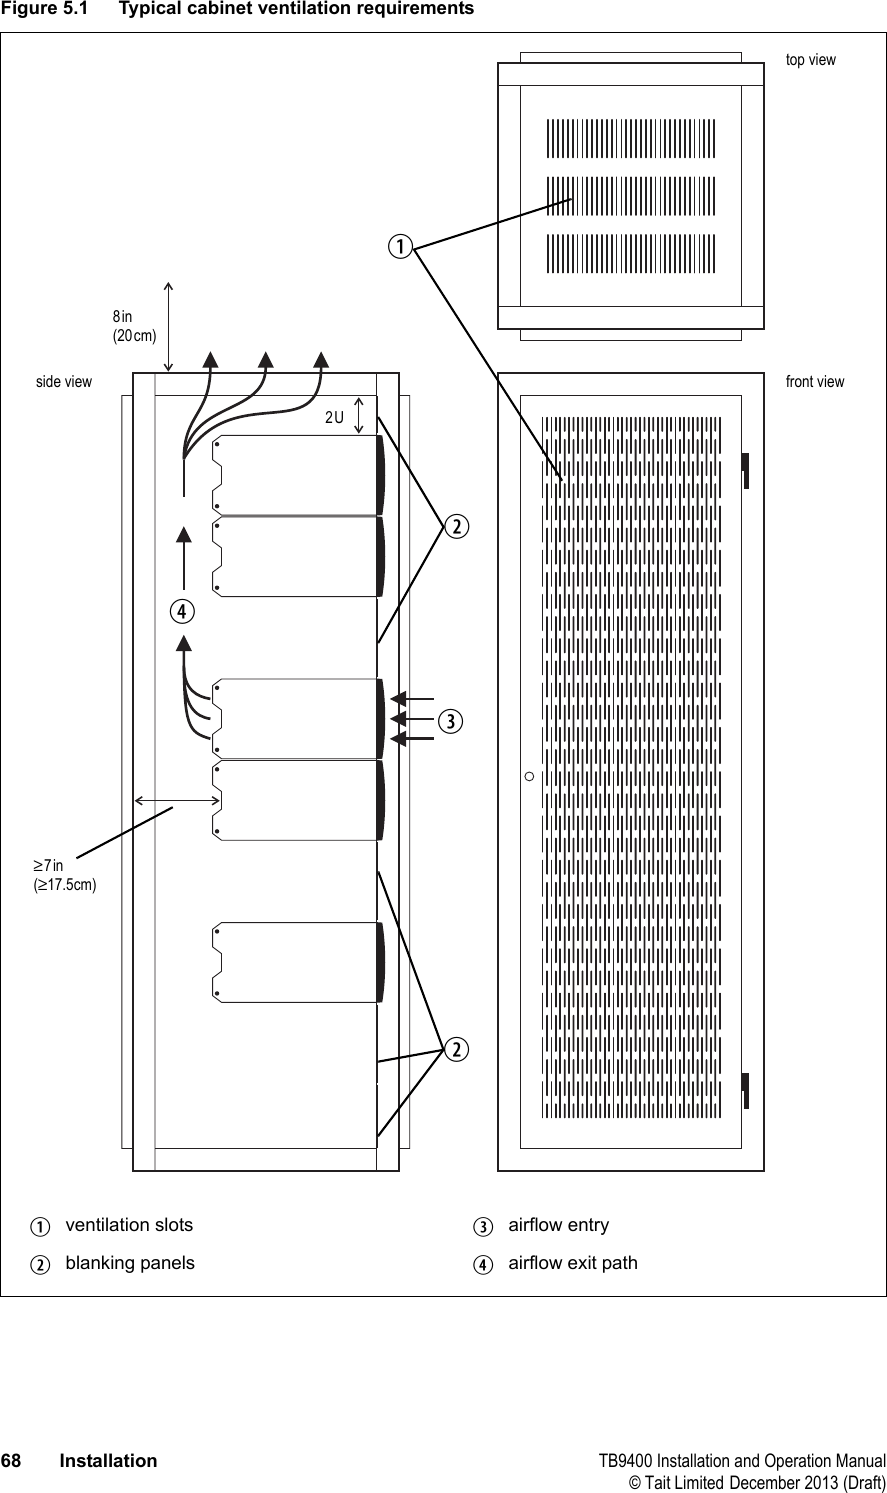  68 Installation TB9400 Installation and Operation Manual© Tait Limited December 2013 (Draft)Figure 5.1 Typical cabinet ventilation requirementsbventilation slots dairflow entrycblanking panels eairflow exit path8in(20cm)2U≥7in(≥17.5cm)side view front viewtop viewccdeb